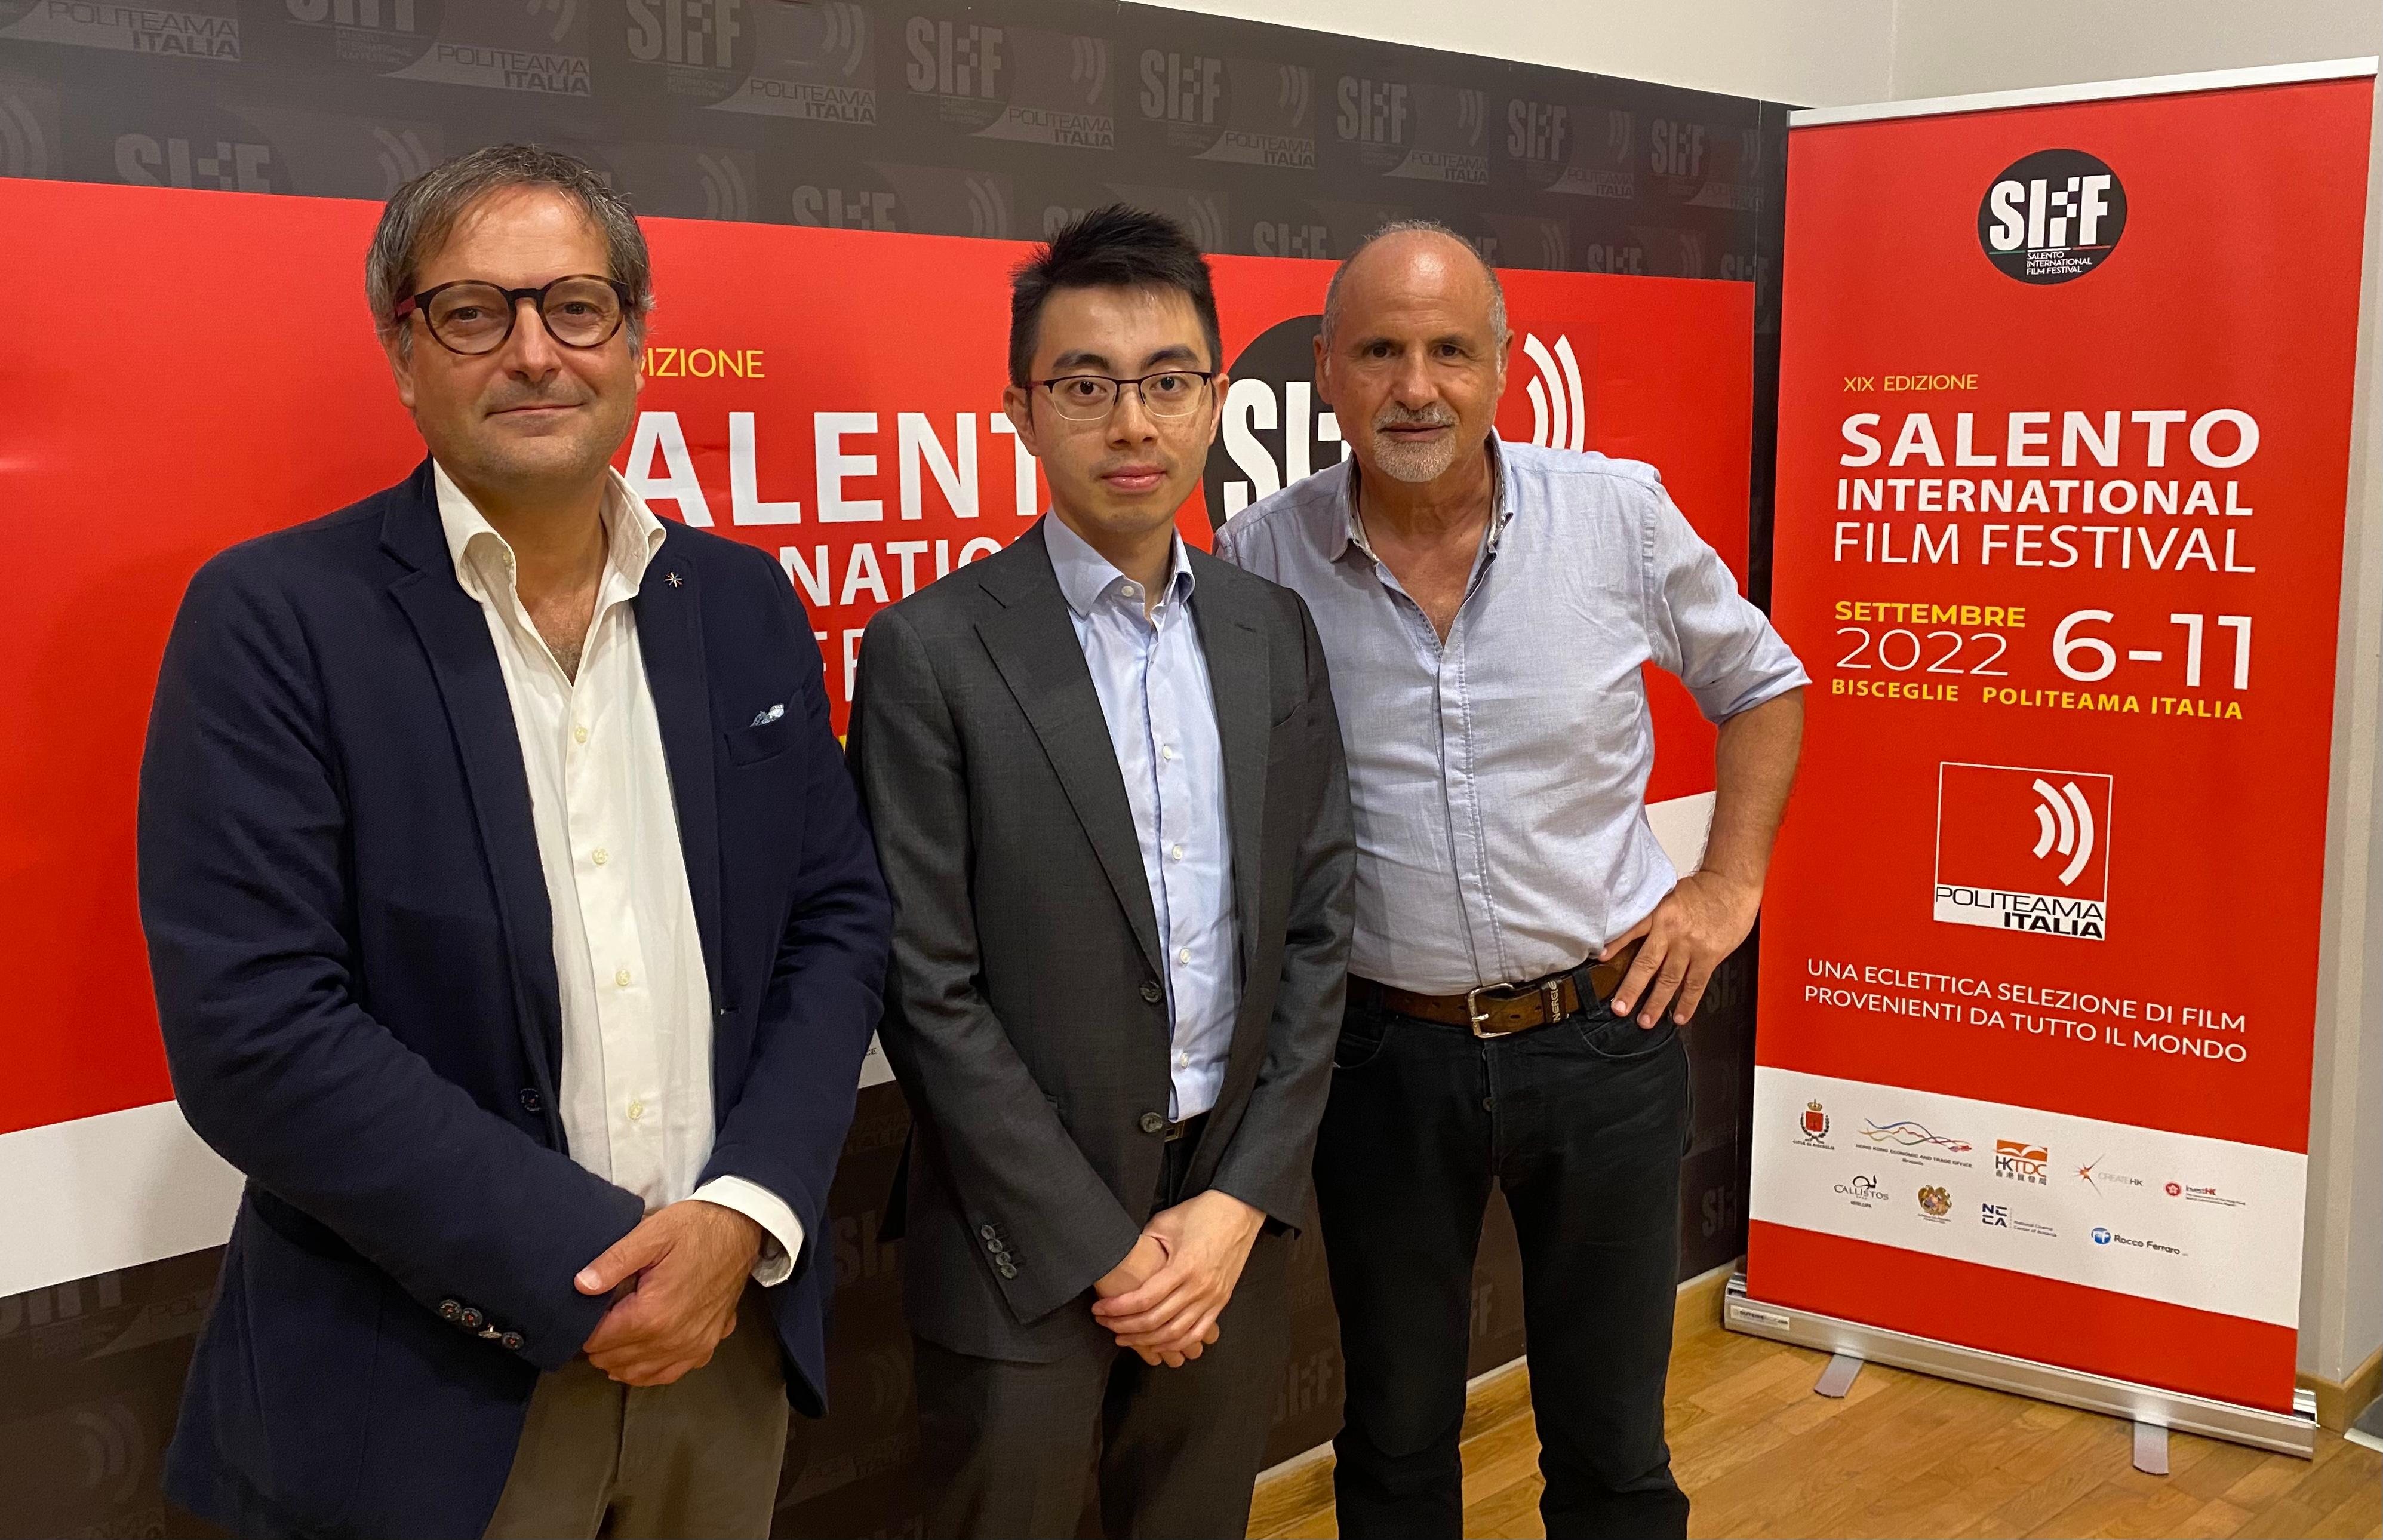 The Hong Kong Economic and Trade Office in Brussels (HKETO, Brussels) supported the participation of Hong Kong films at the Salento International Film Festival (SIFF), being held from September 6 to 11 (Bisceglie time) in Bisceglie, in the Apulia region of southern Italy. Photo shows the Deputy Representative of the HKETO, Brussels, Mr Henry Tsoi (centre) joining a photo call at the 19th SIFF on September 8, 2022 (Bisceglie time) in Bisceglie, Italy, with the Founder of SIFF, Mr Gigi Campanile (right) and Mayor of Bisceglie, Mr Angelantonio Angarano (left).